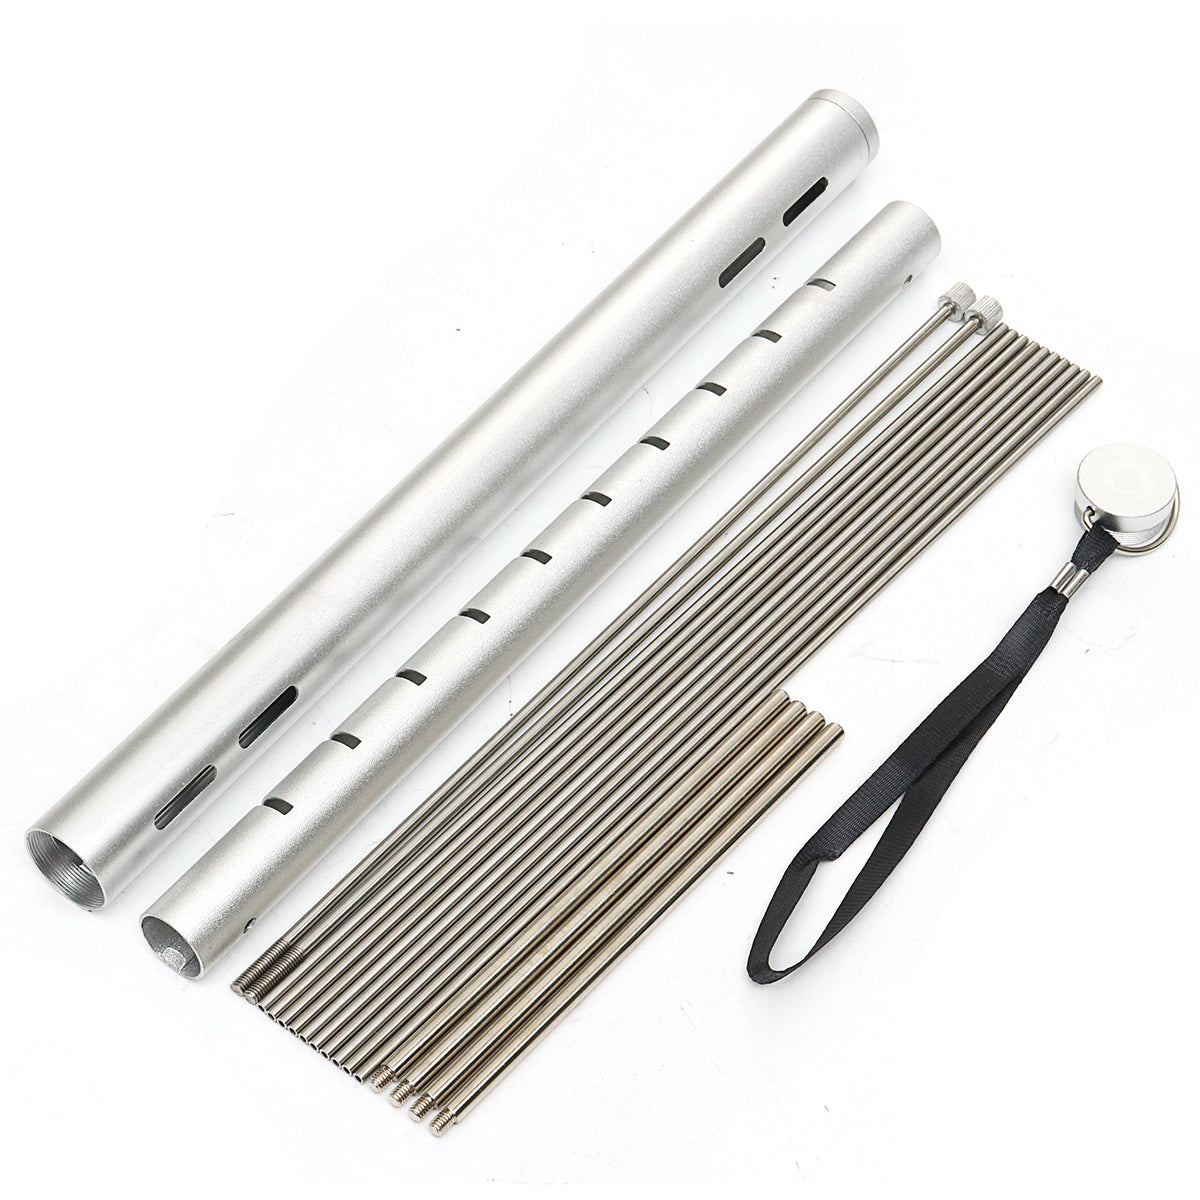 Outdoor Portable Folding Stainless Steel Barbecue Grill Camping Picnic BBQ Rack